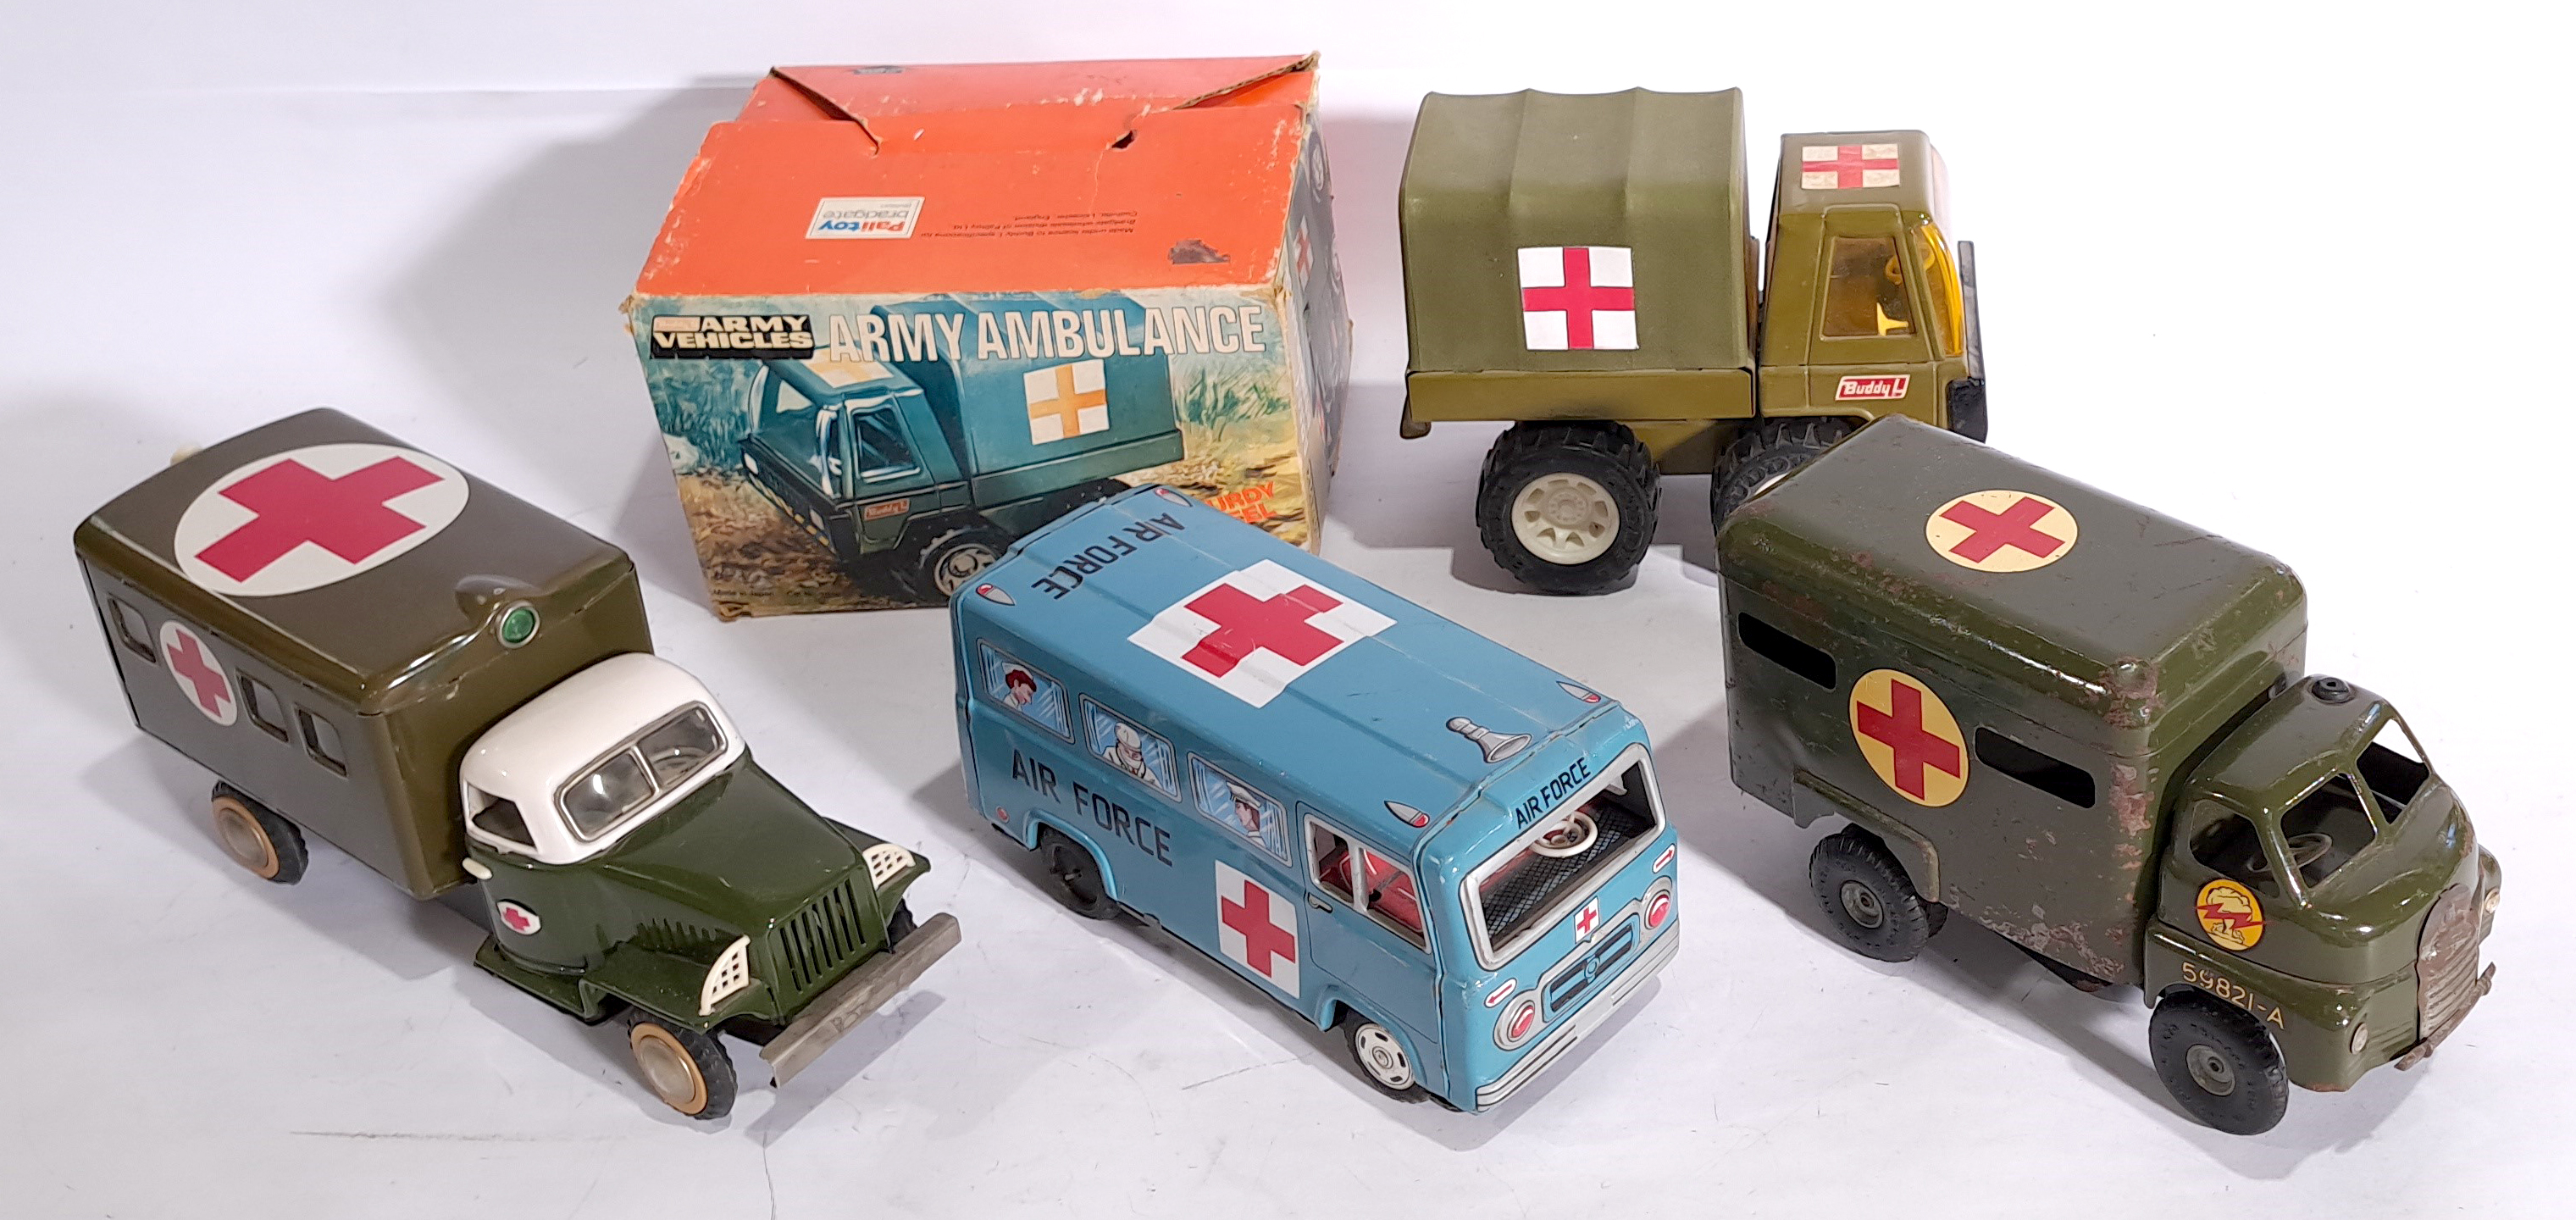 Palitoy Sturdy Steel & similar, Military Ambulance, a boxed & unboxed group